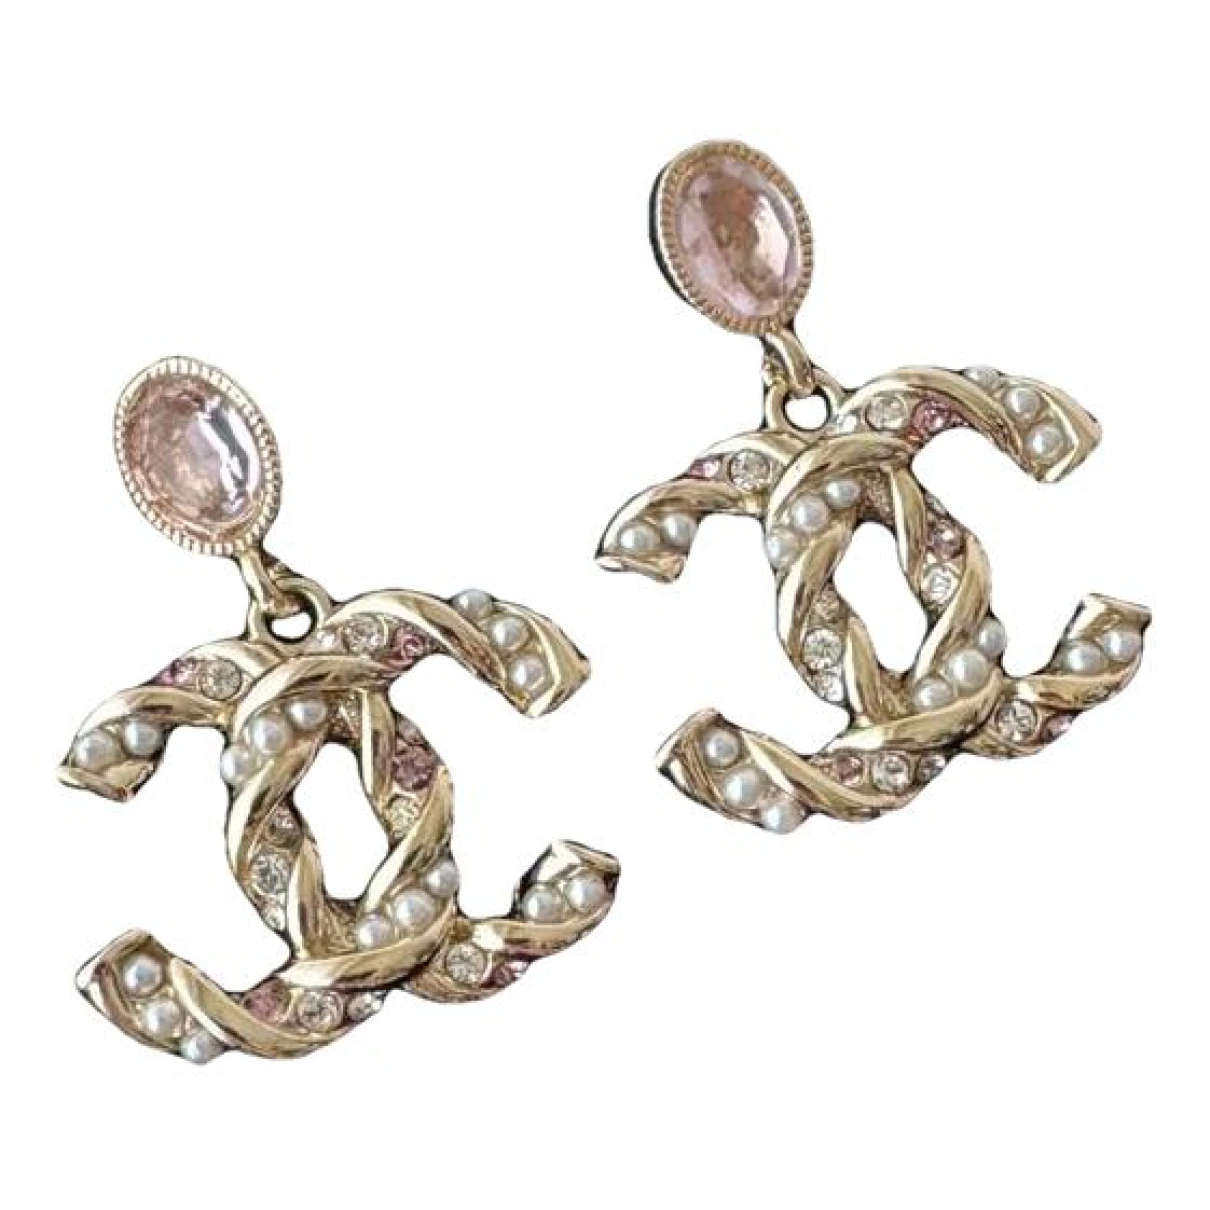 jewellery Chanel earrings for Female Gold plated. Used condition